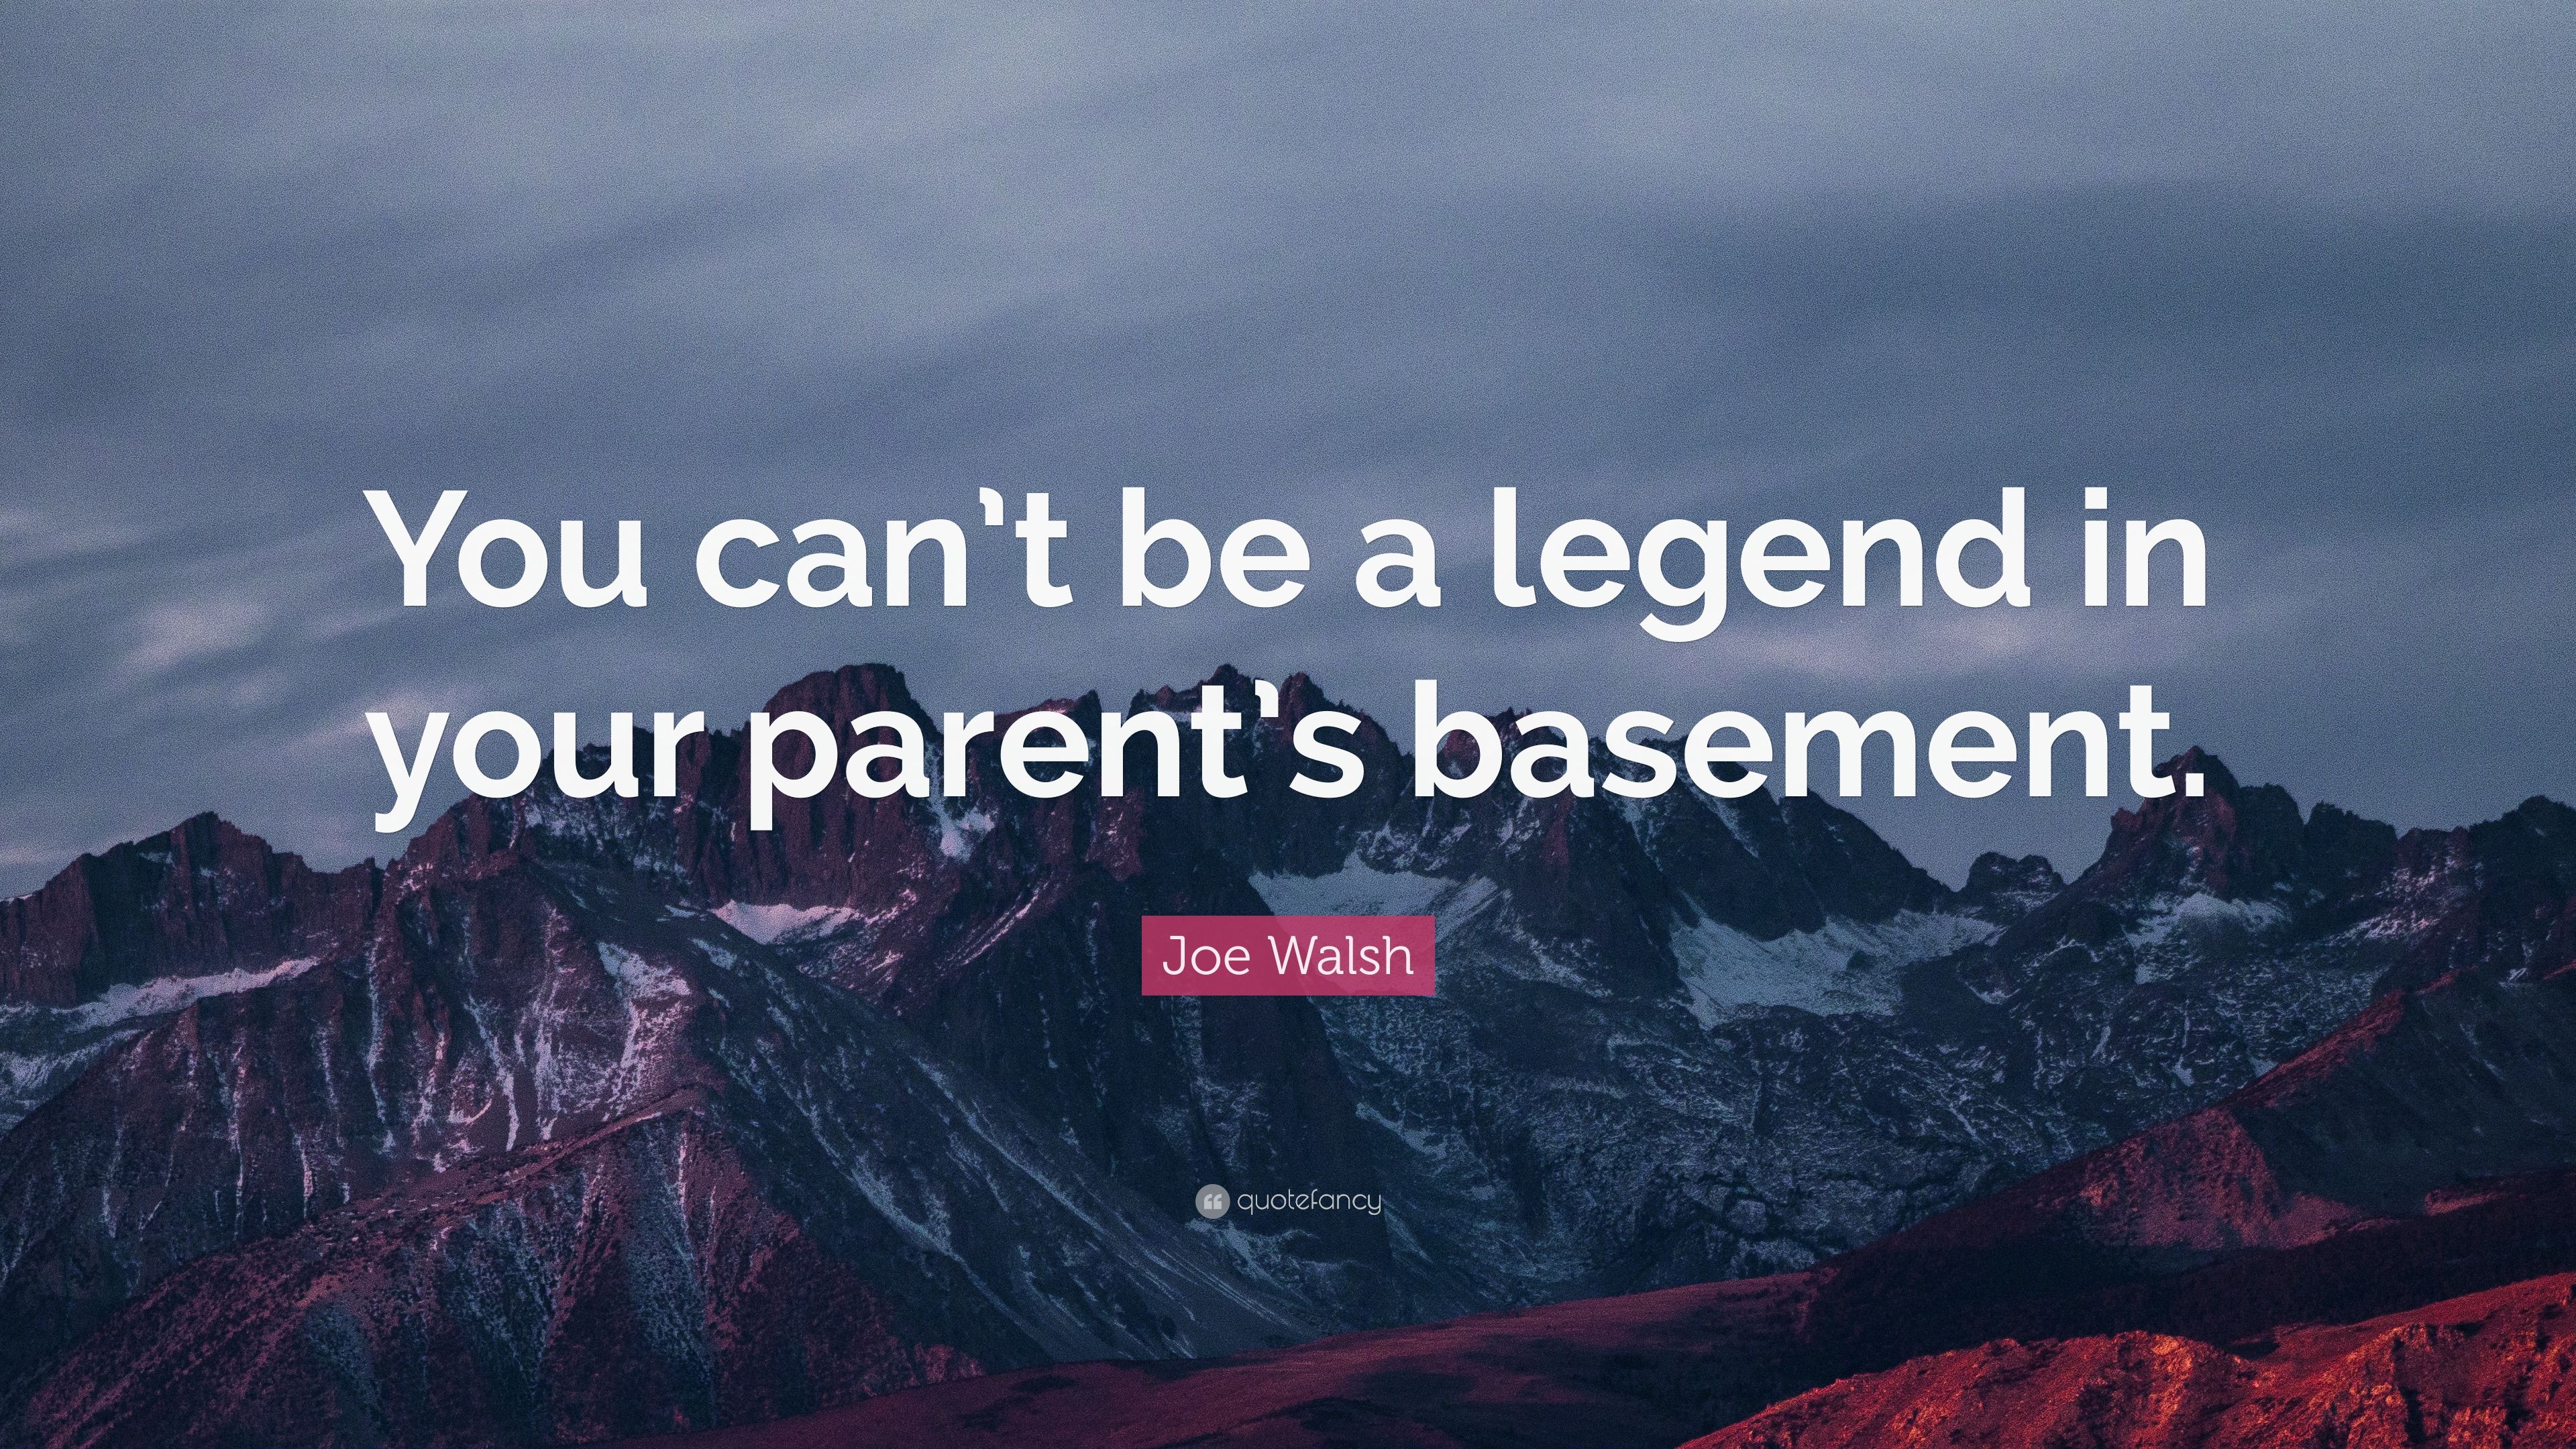 Joe Walsh Quote: “You can't be a legend in your parent's basement